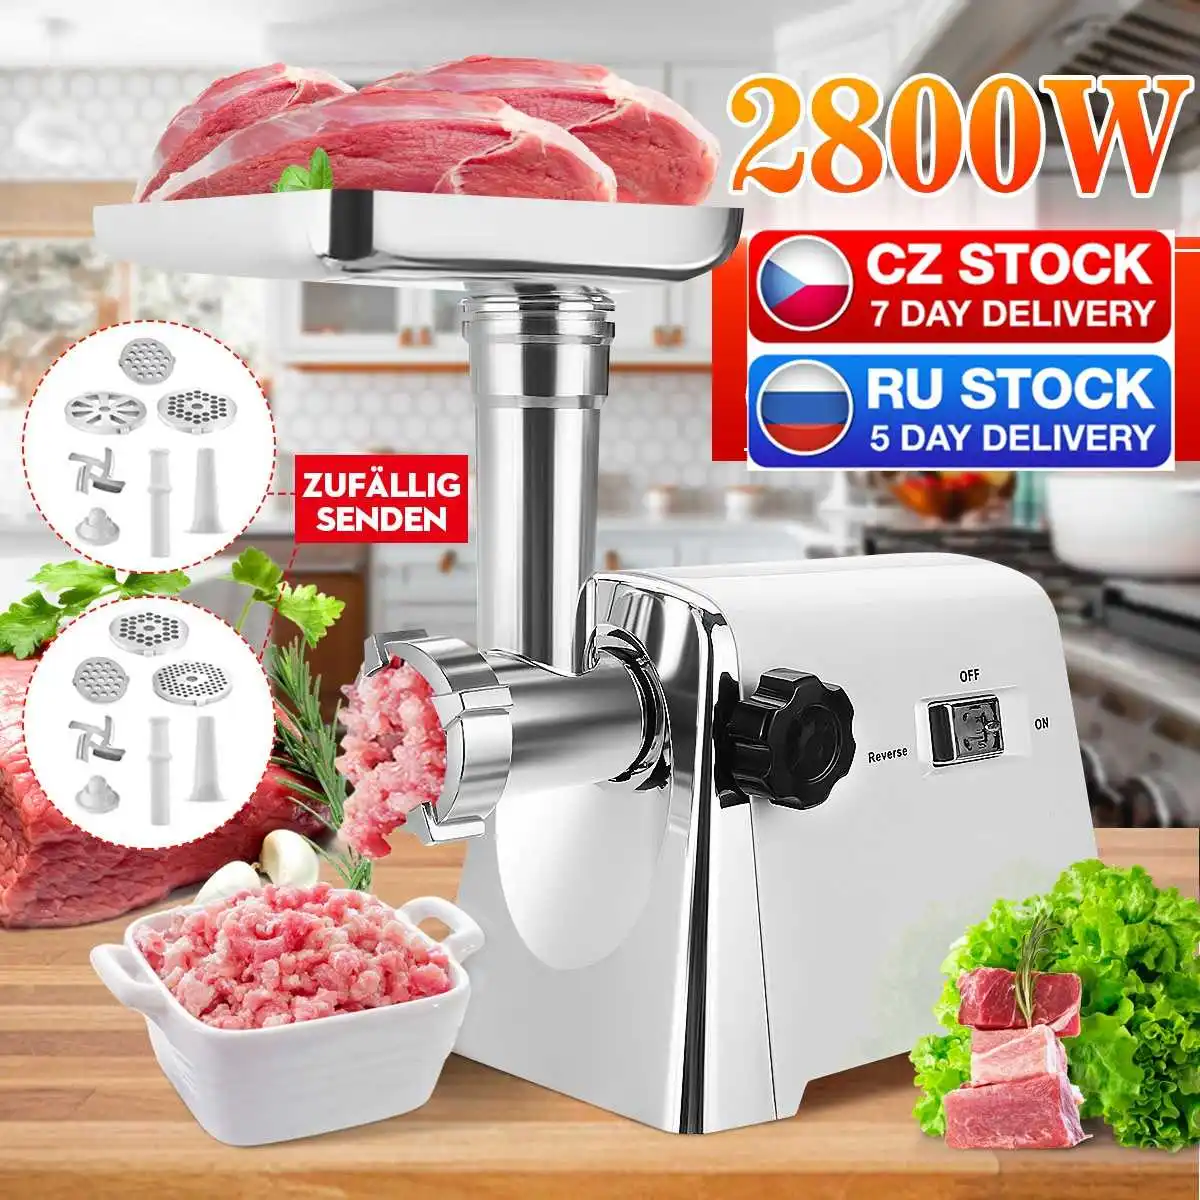 https://ae01.alicdn.com/kf/S5e2844e76f744ec69bd8f23b6700e322U/Heavy-Duty-2800W-Max-Powerful-Electric-Meat-Grinder-Home-Sausage-Stuffer-Meat-Mincer-Household-Food-Processor.jpeg